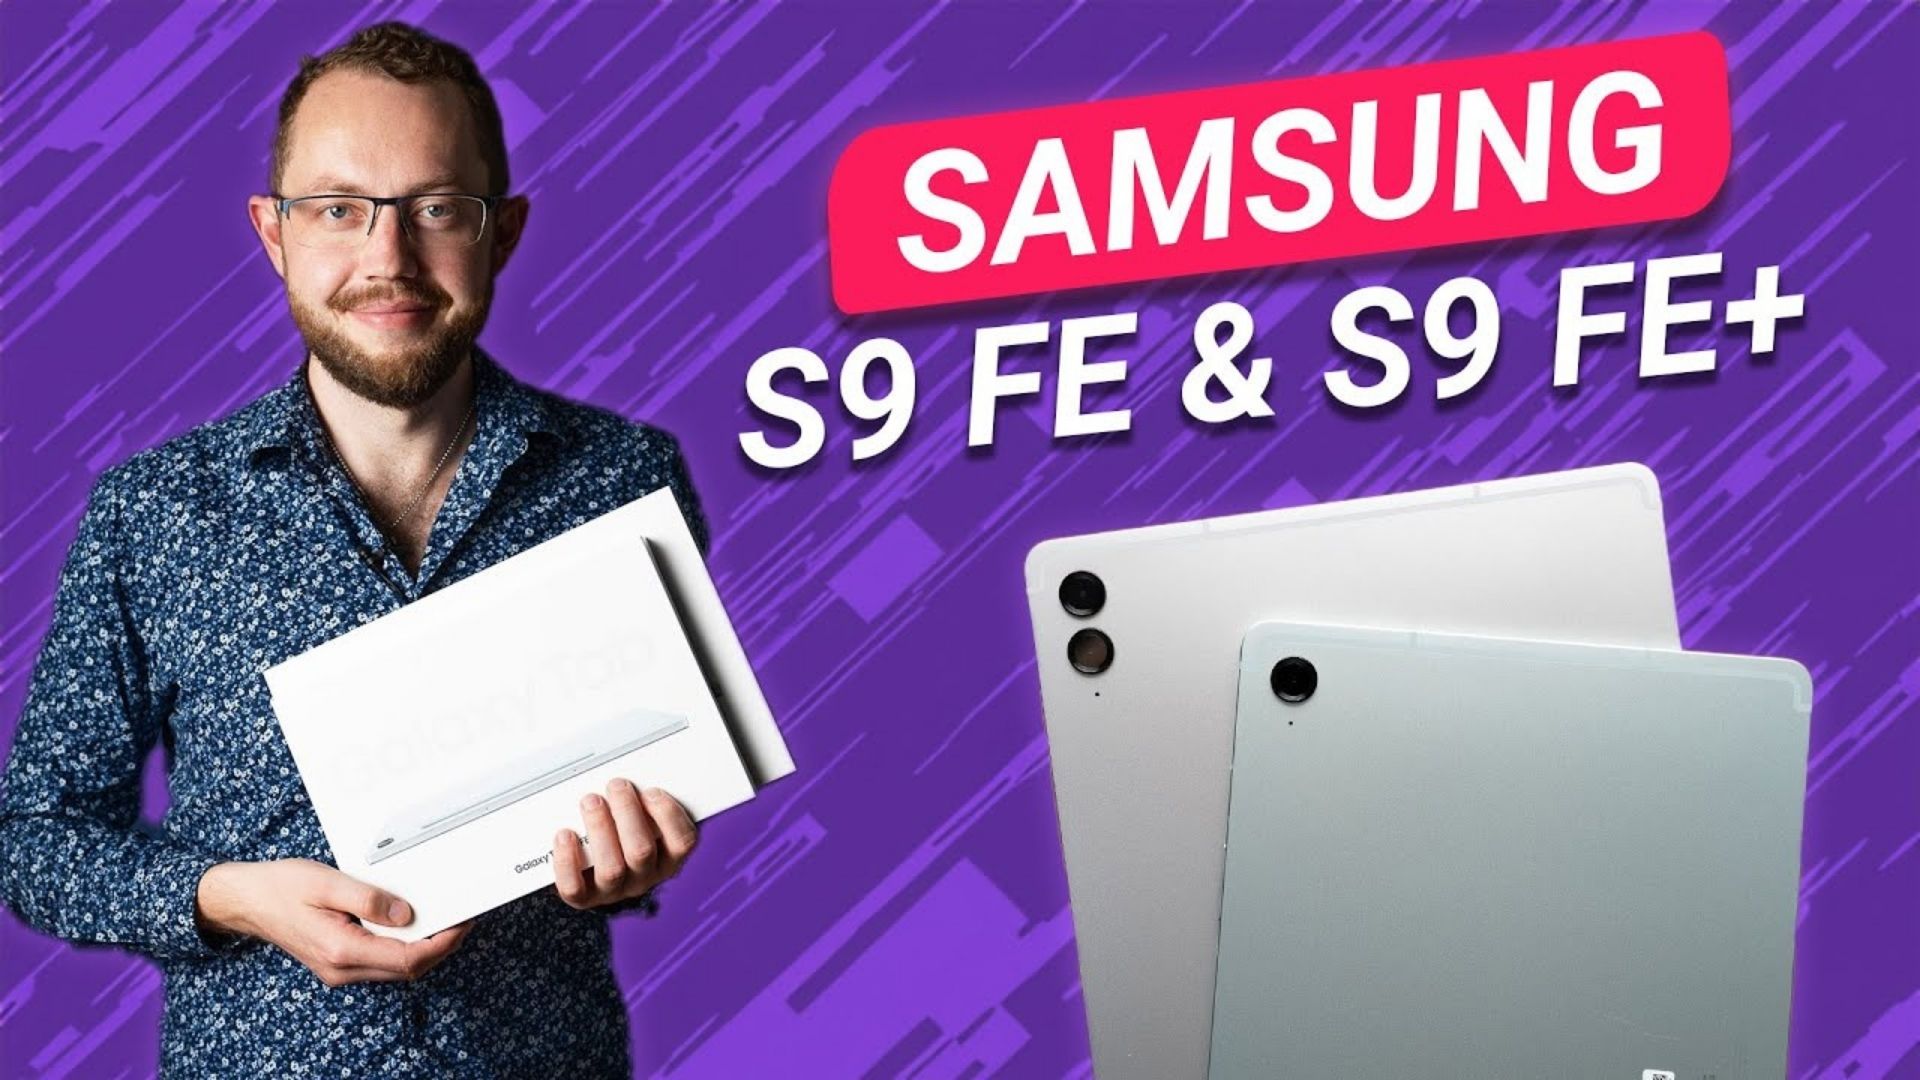 Samsung Galaxy Tab S9 FE and Tab S9 FE Plus unboxing and first impressions